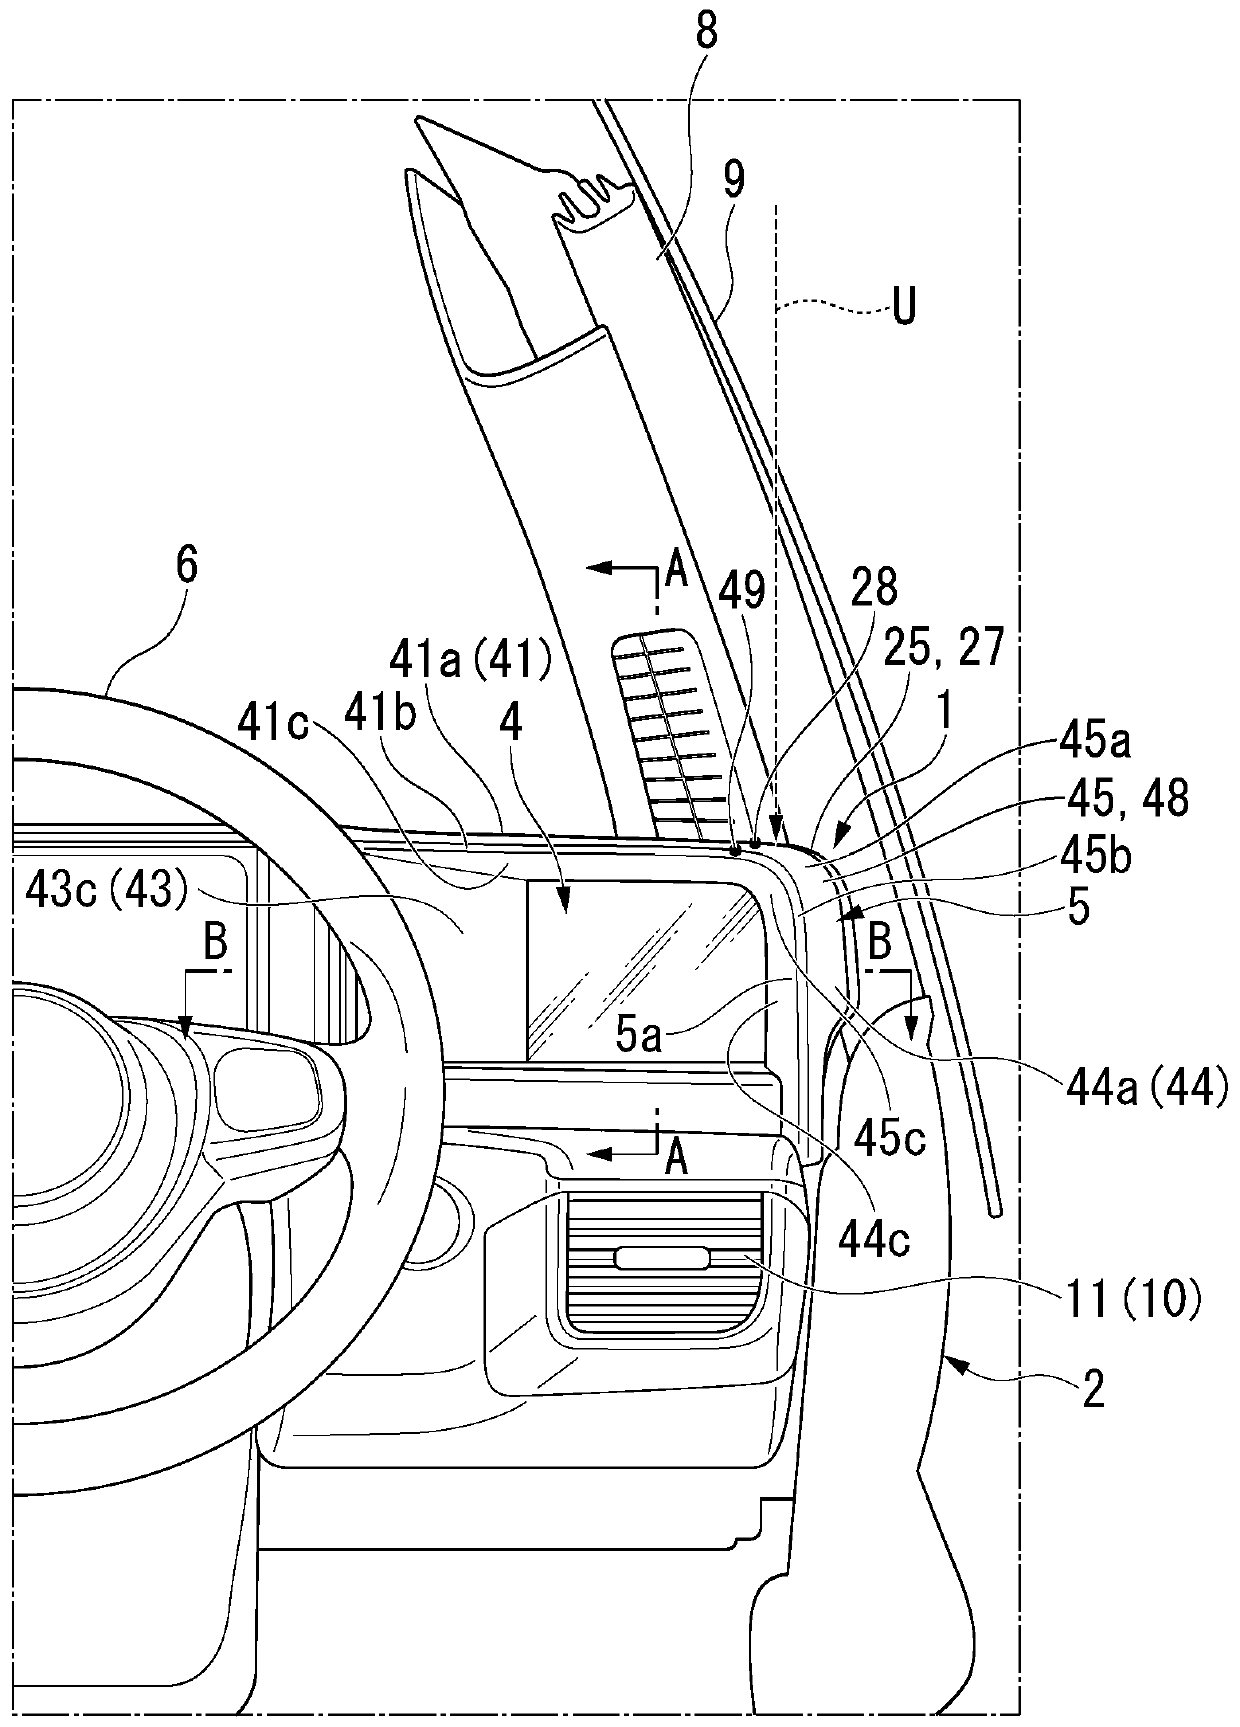 Rearview monitor apparatus